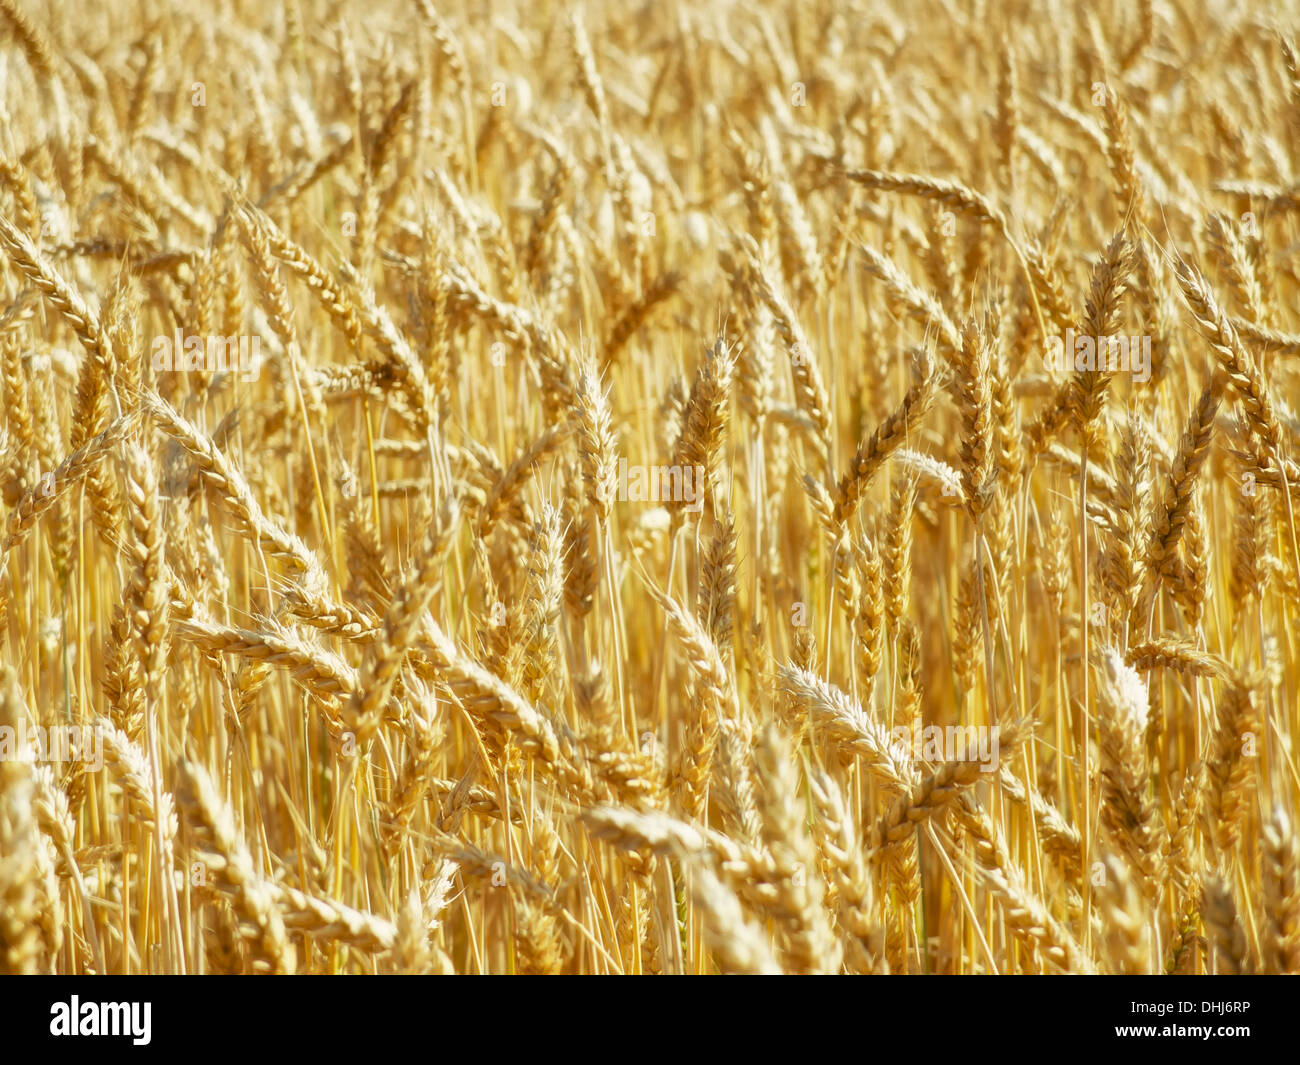 Golden wheat crop grown in the field and bathing in sunlight Stock Photo